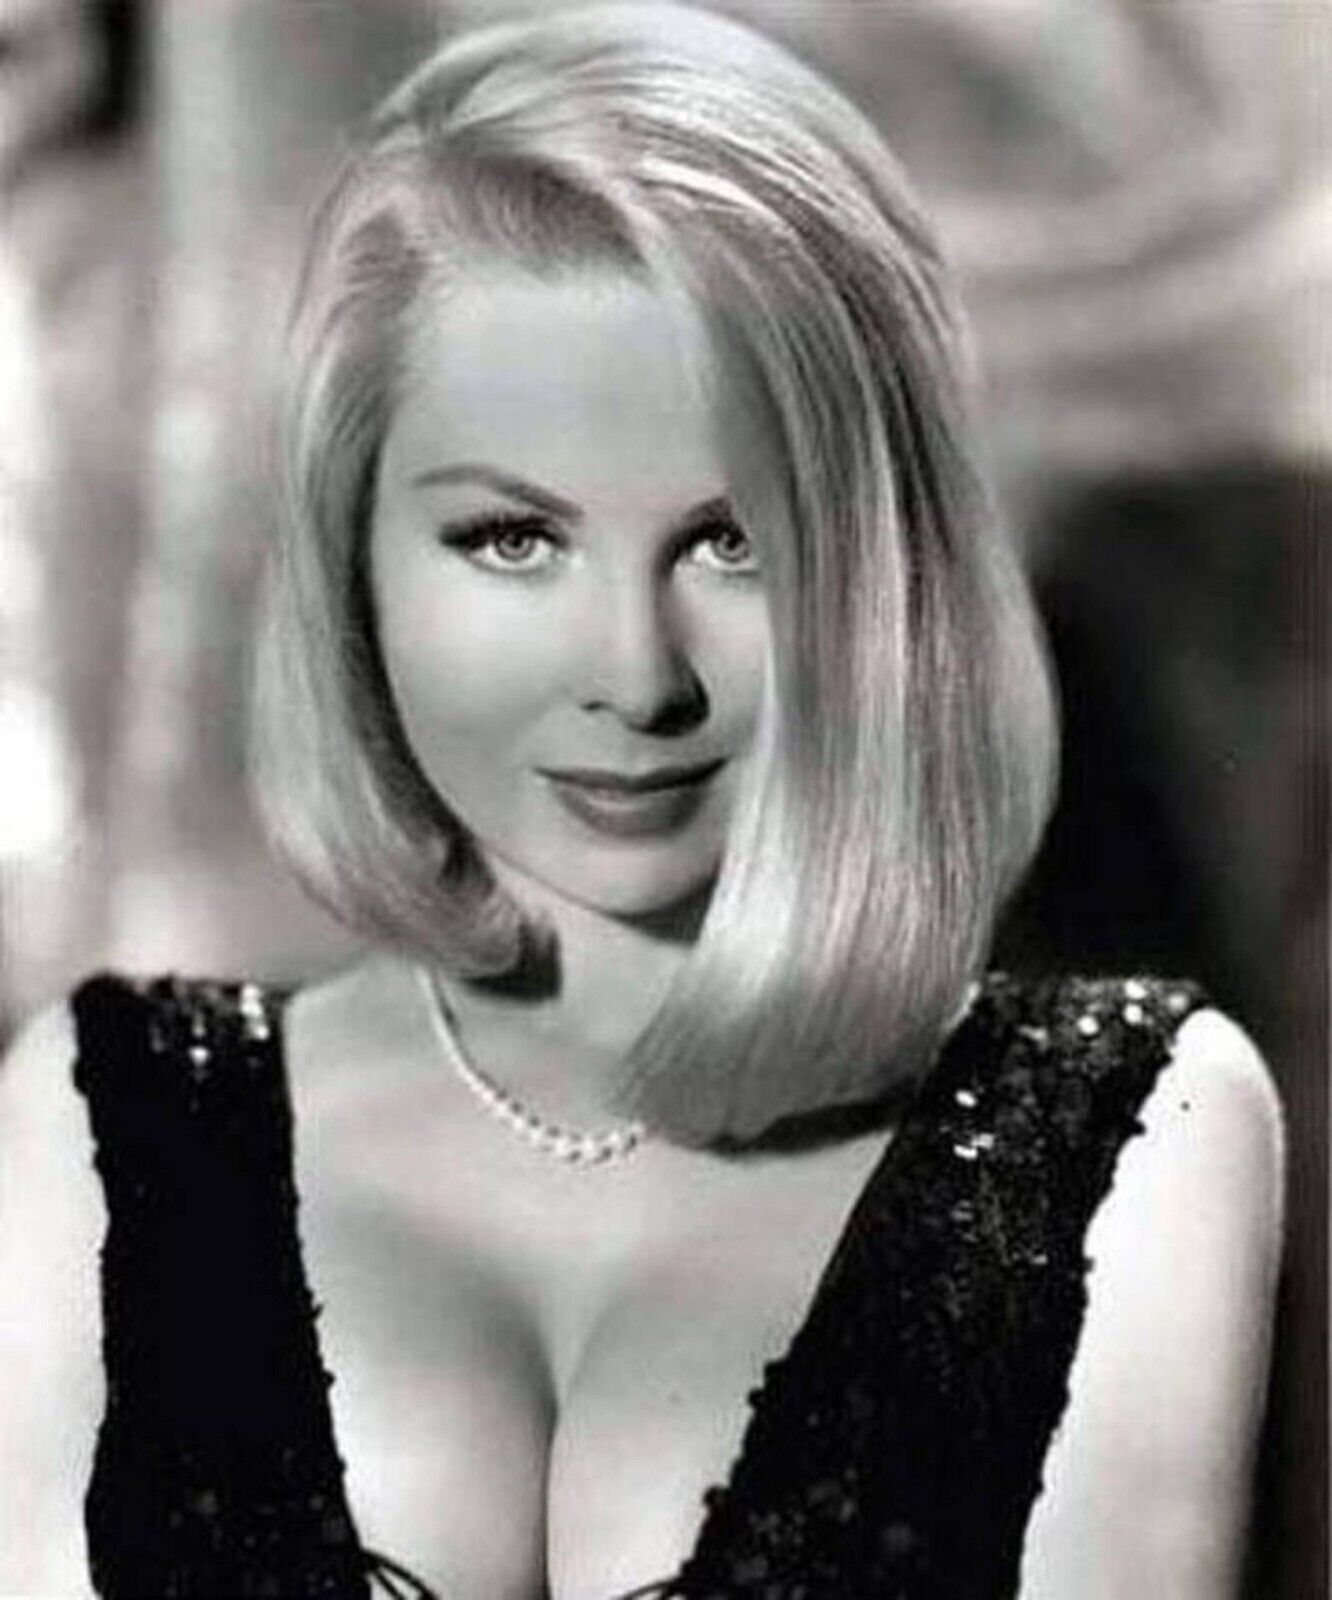 Iconic Actress JOI LANSING Classic Publicity Picture Poster Photo Print 8x10